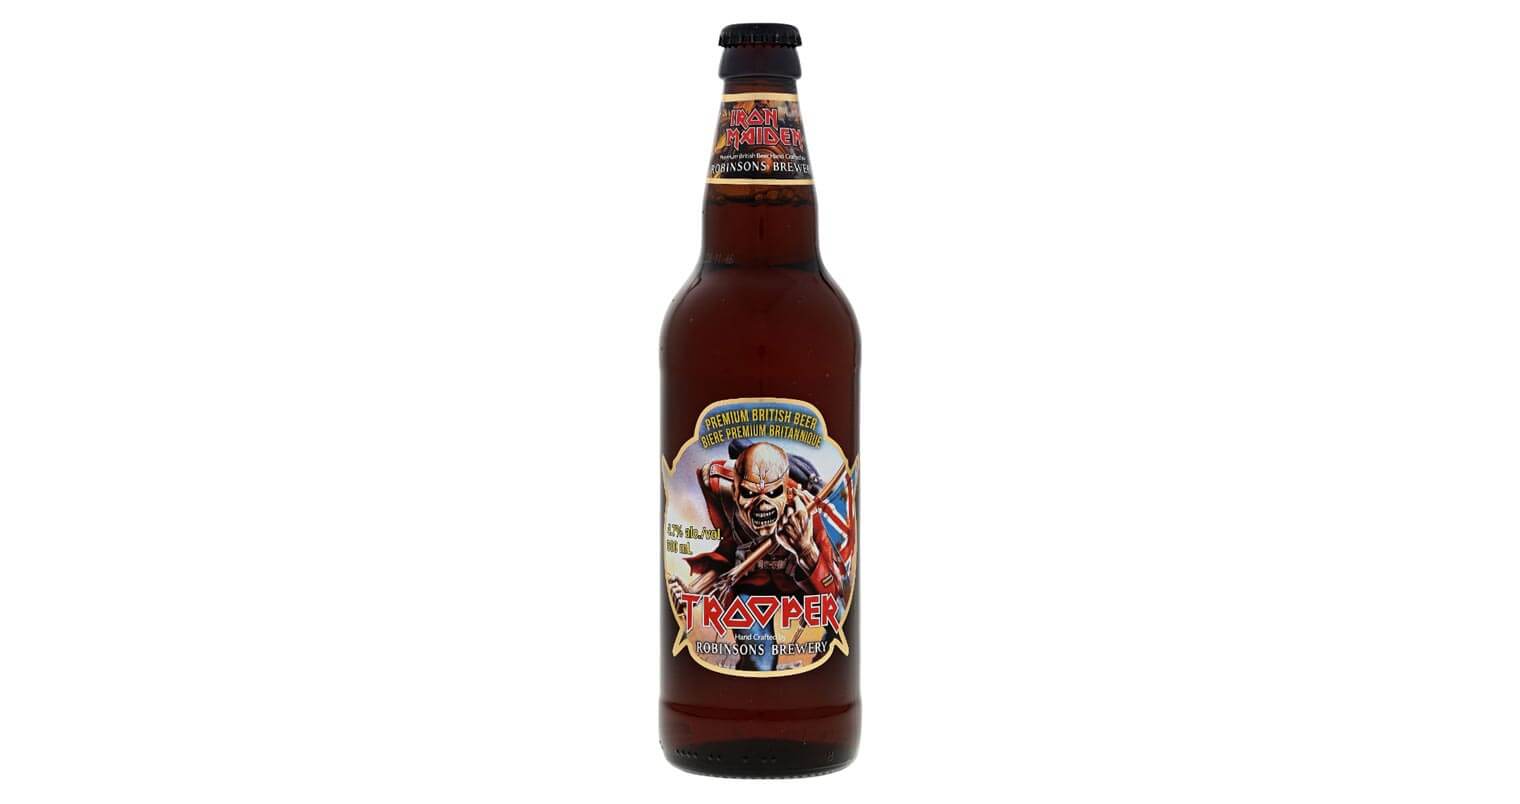 Iron Maiden Launches "Trooper" Beer, featured image